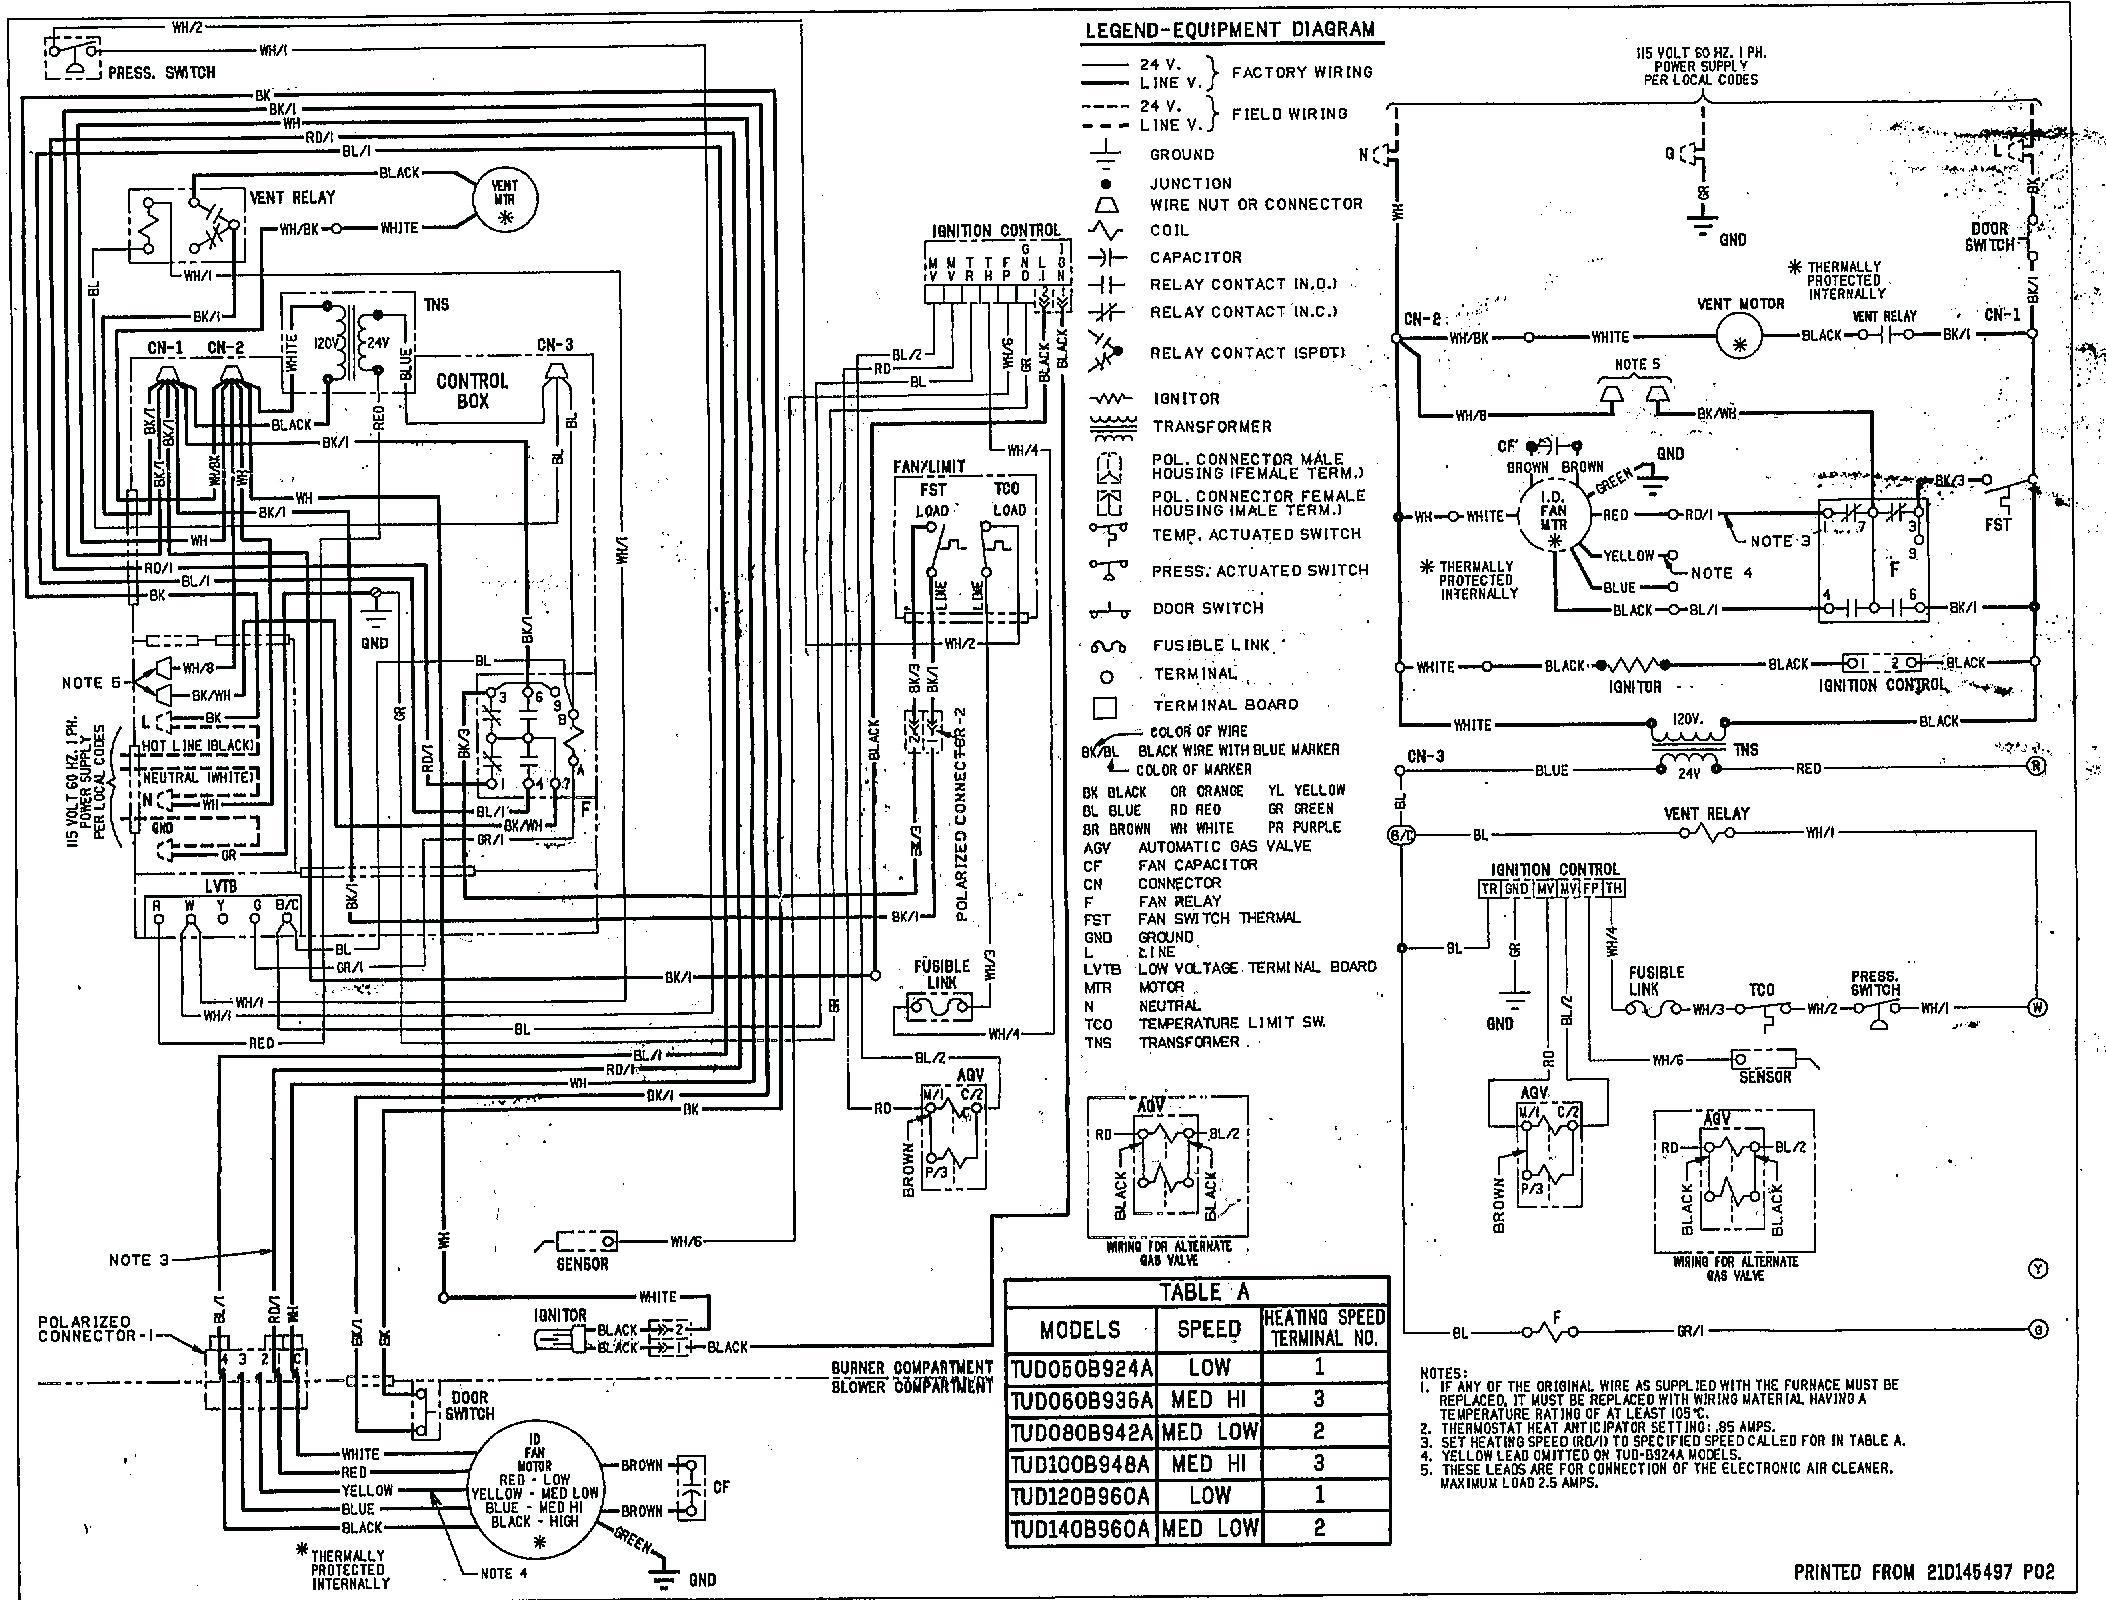 Wireless Focuspro Thermostat Trane Xl80 Furnace Wiring Diagram I Have Found The Control Box Circuit Board Lennox To Older Gas At Trane Wiring Diagram